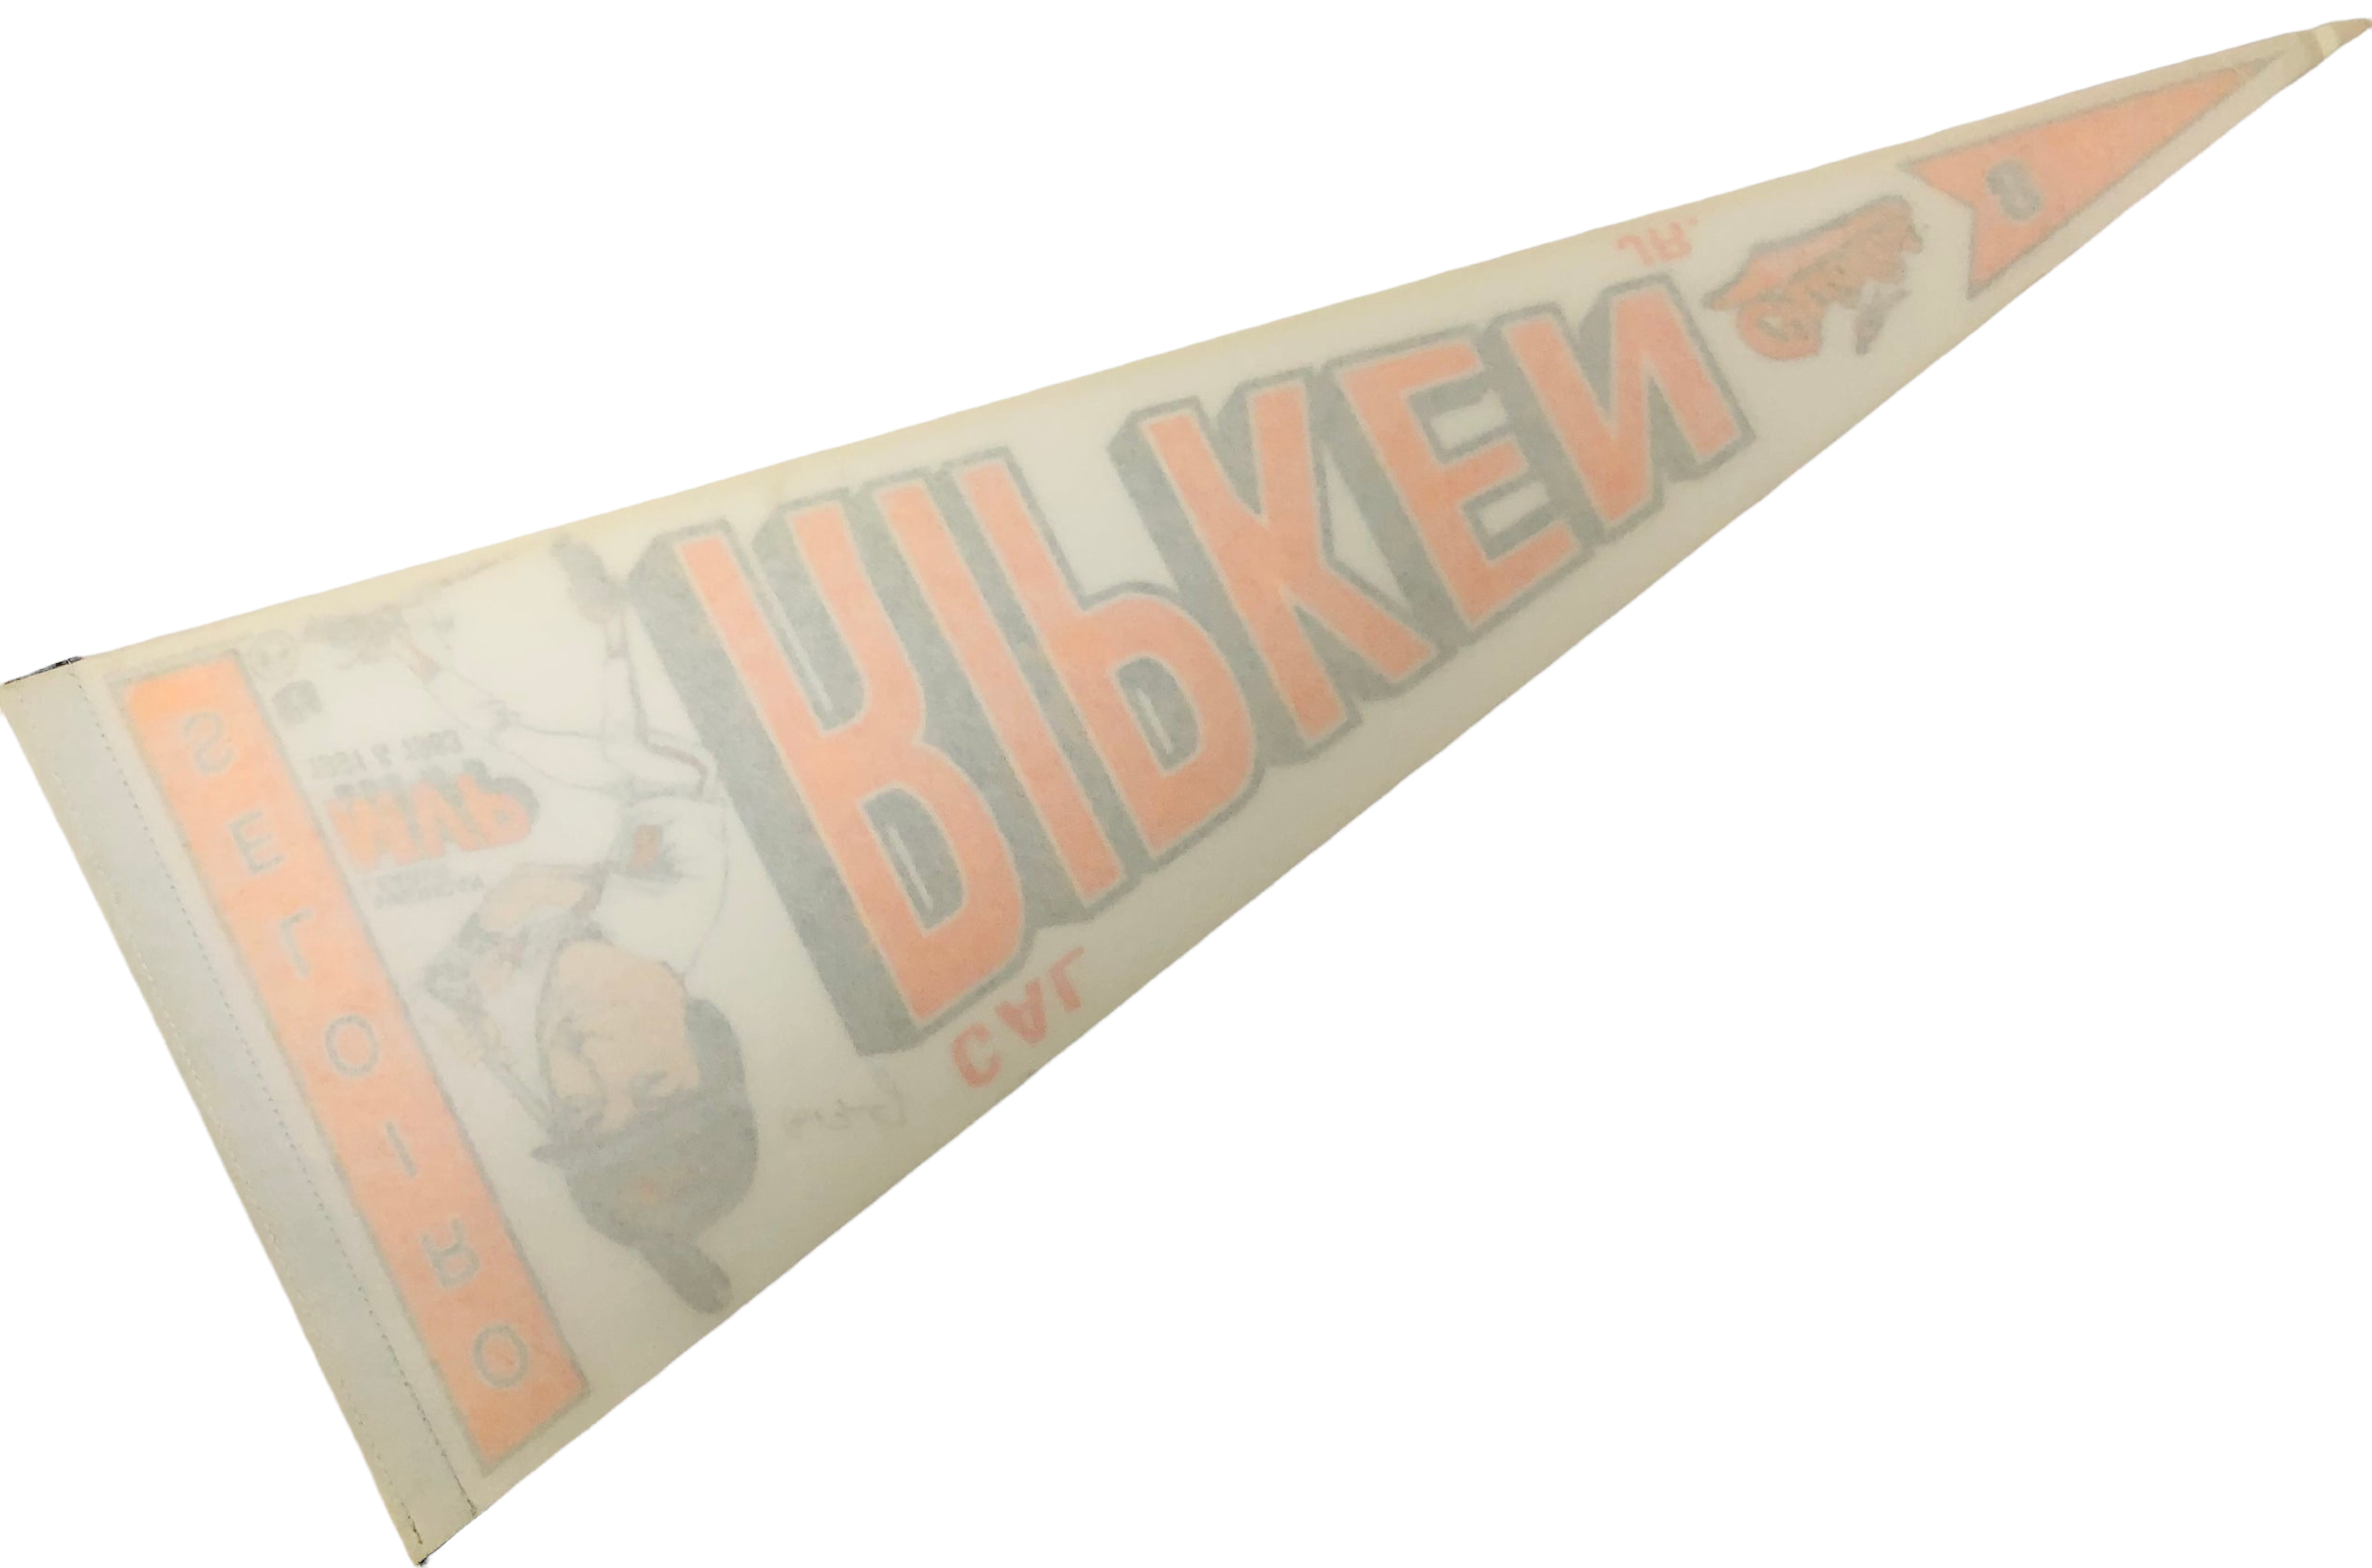  WinCraft Baltimore Orioles Large Pennant : Sports